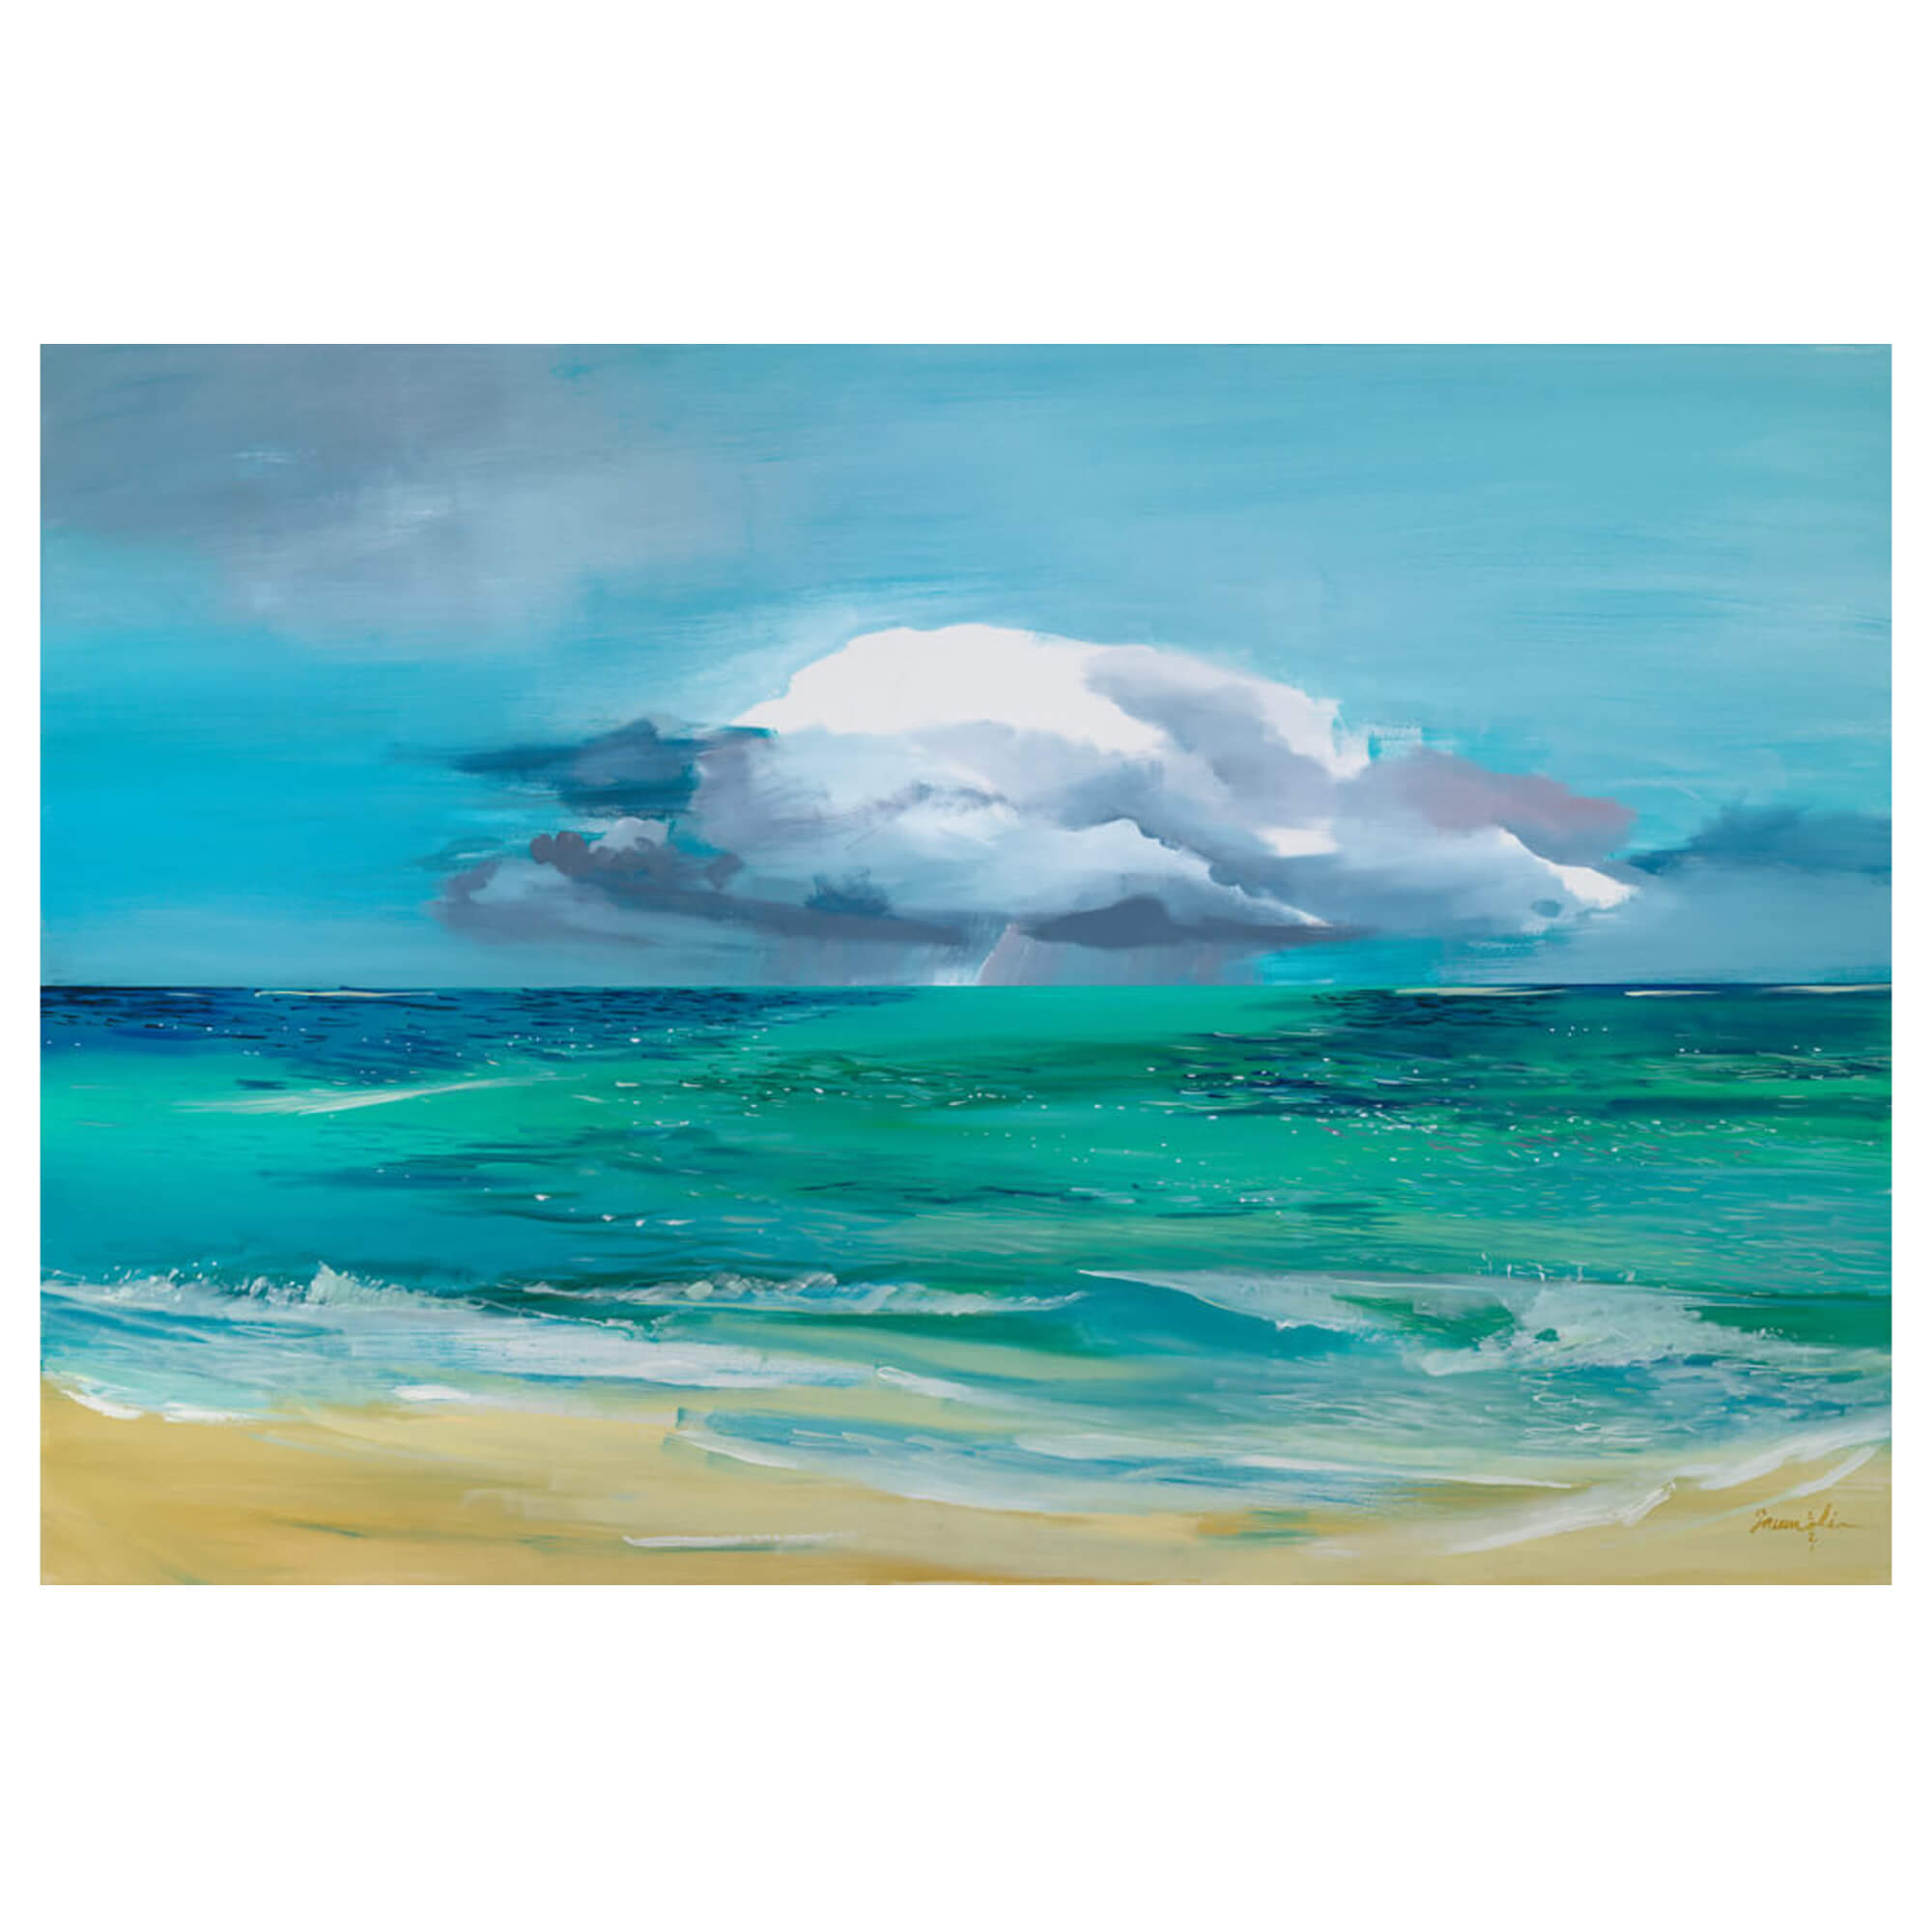 A matted art print depicting calm tranquil waters leading to a beach oasis by Hawaii artist Saumolia Puapuaga